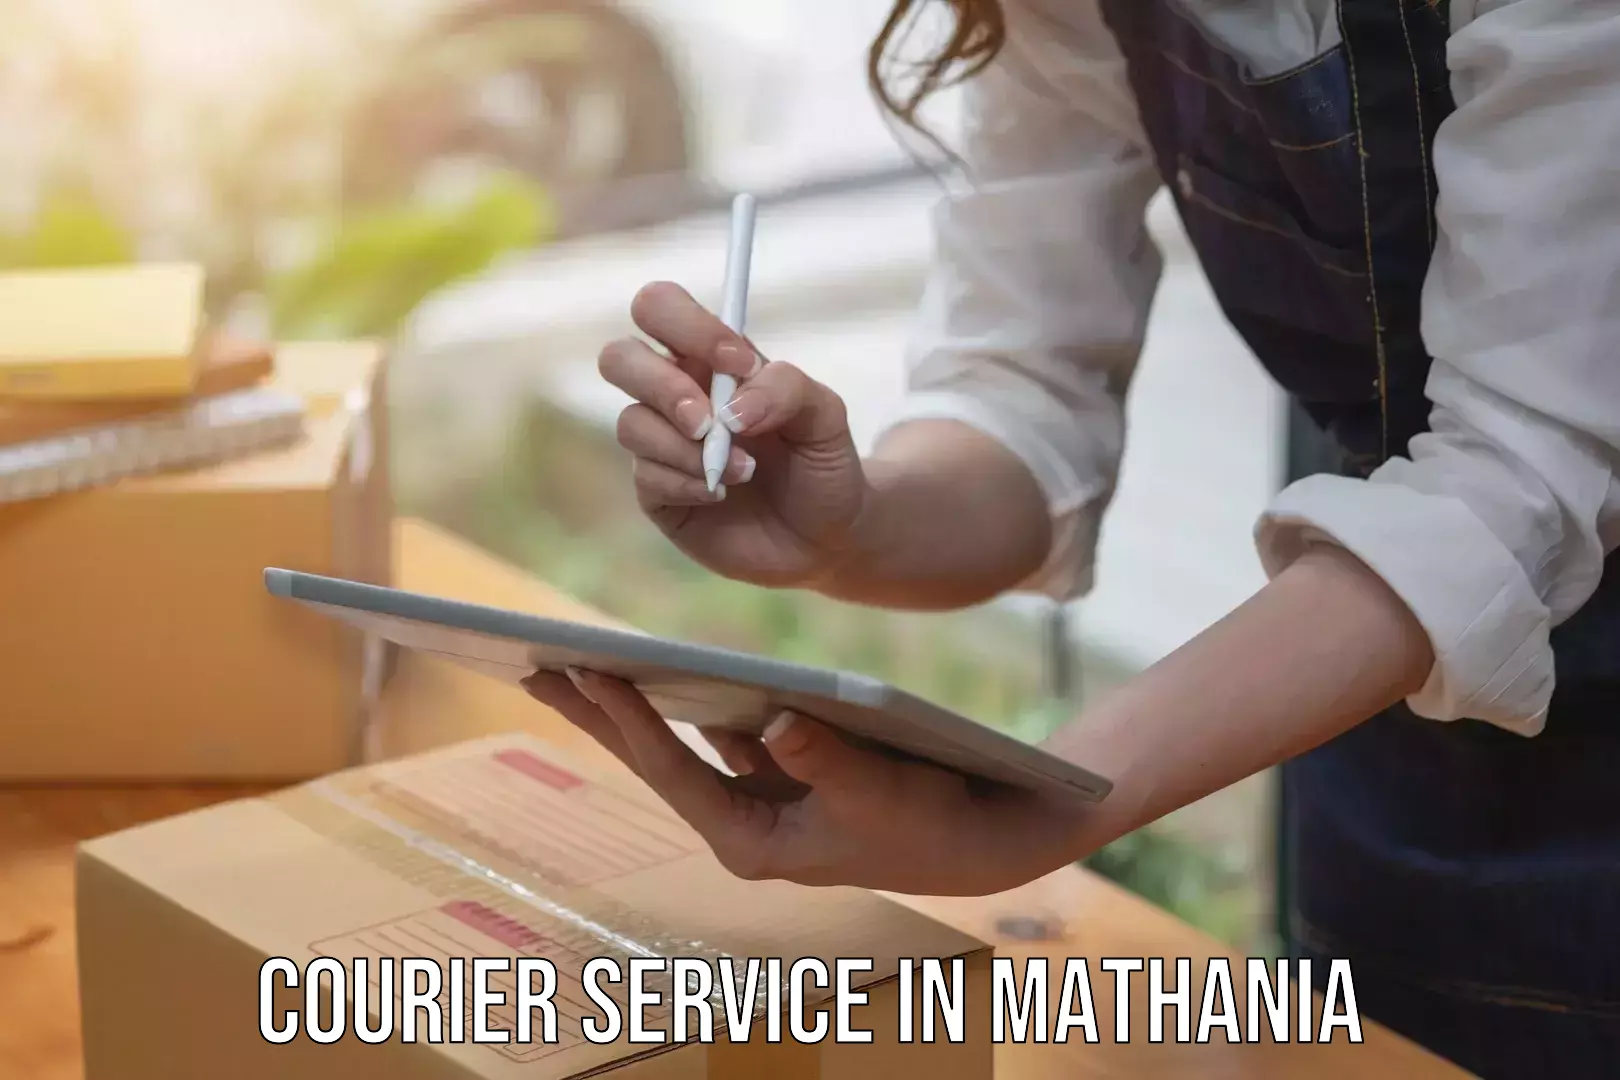 Digital courier platforms in Mathania